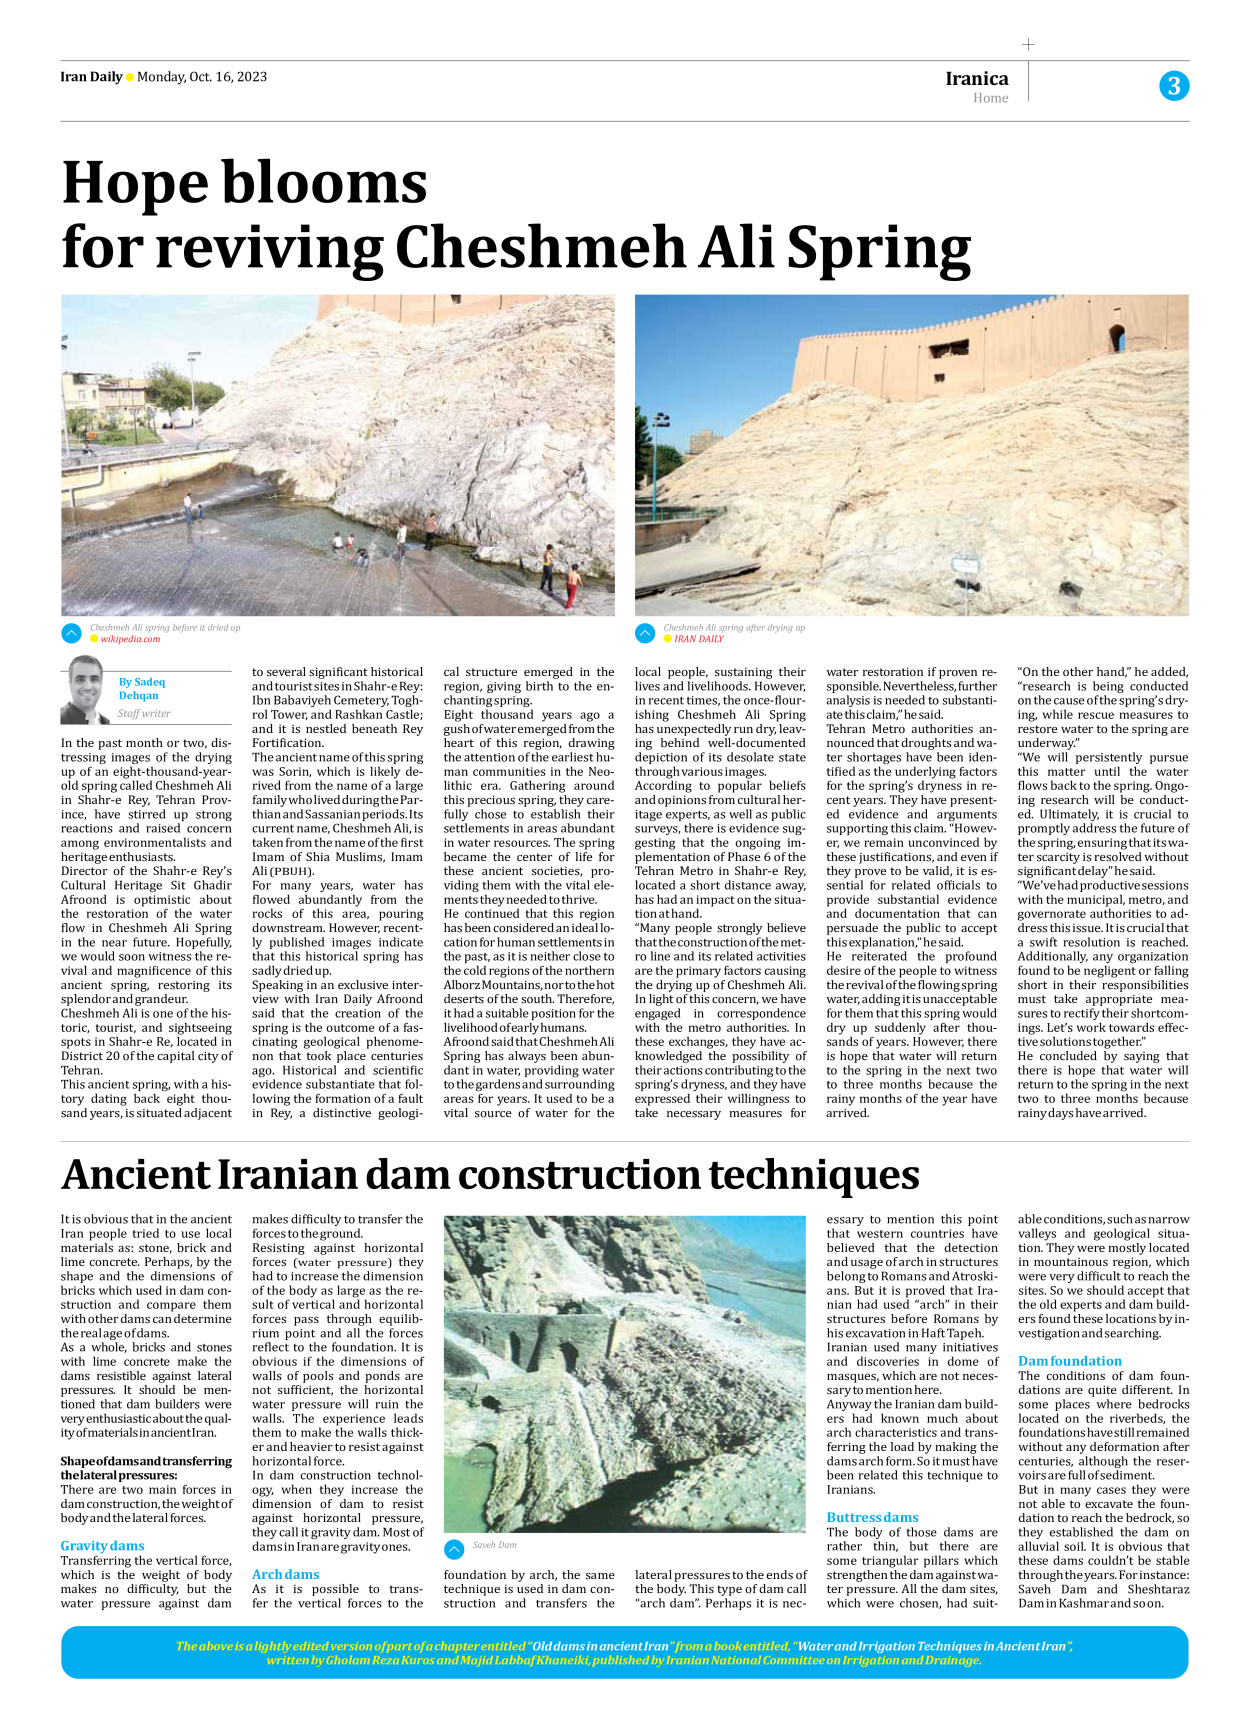 Iran Daily - Number Seven Thousand Four Hundred and Nine - 16 October 2023 - Page 3